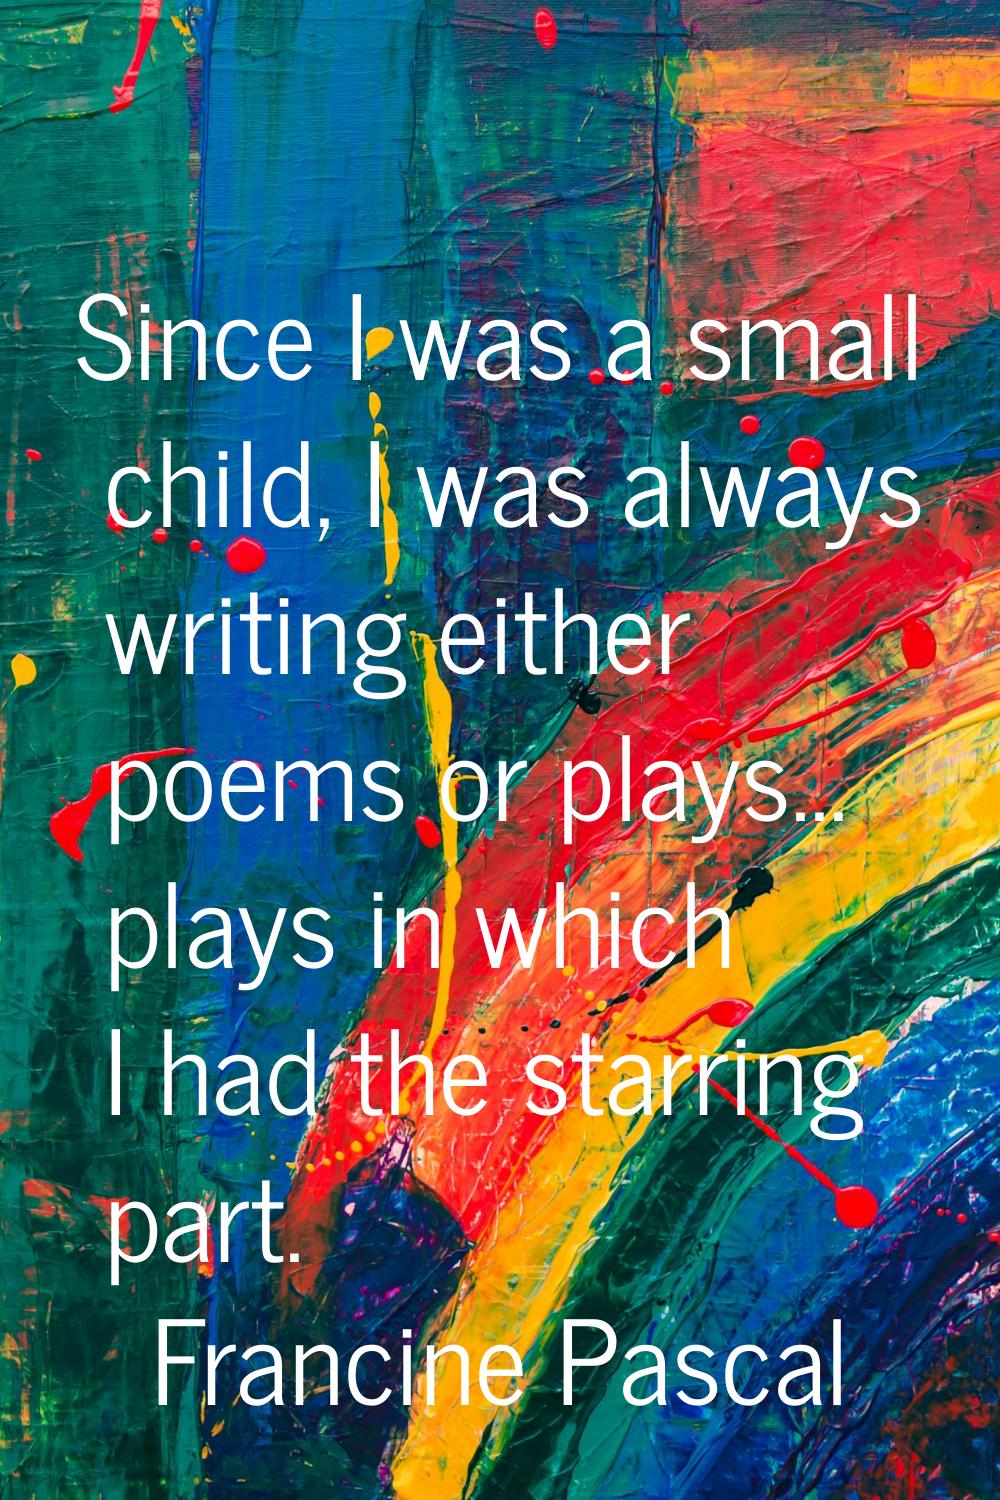 Since I was a small child, I was always writing either poems or plays... plays in which I had the s